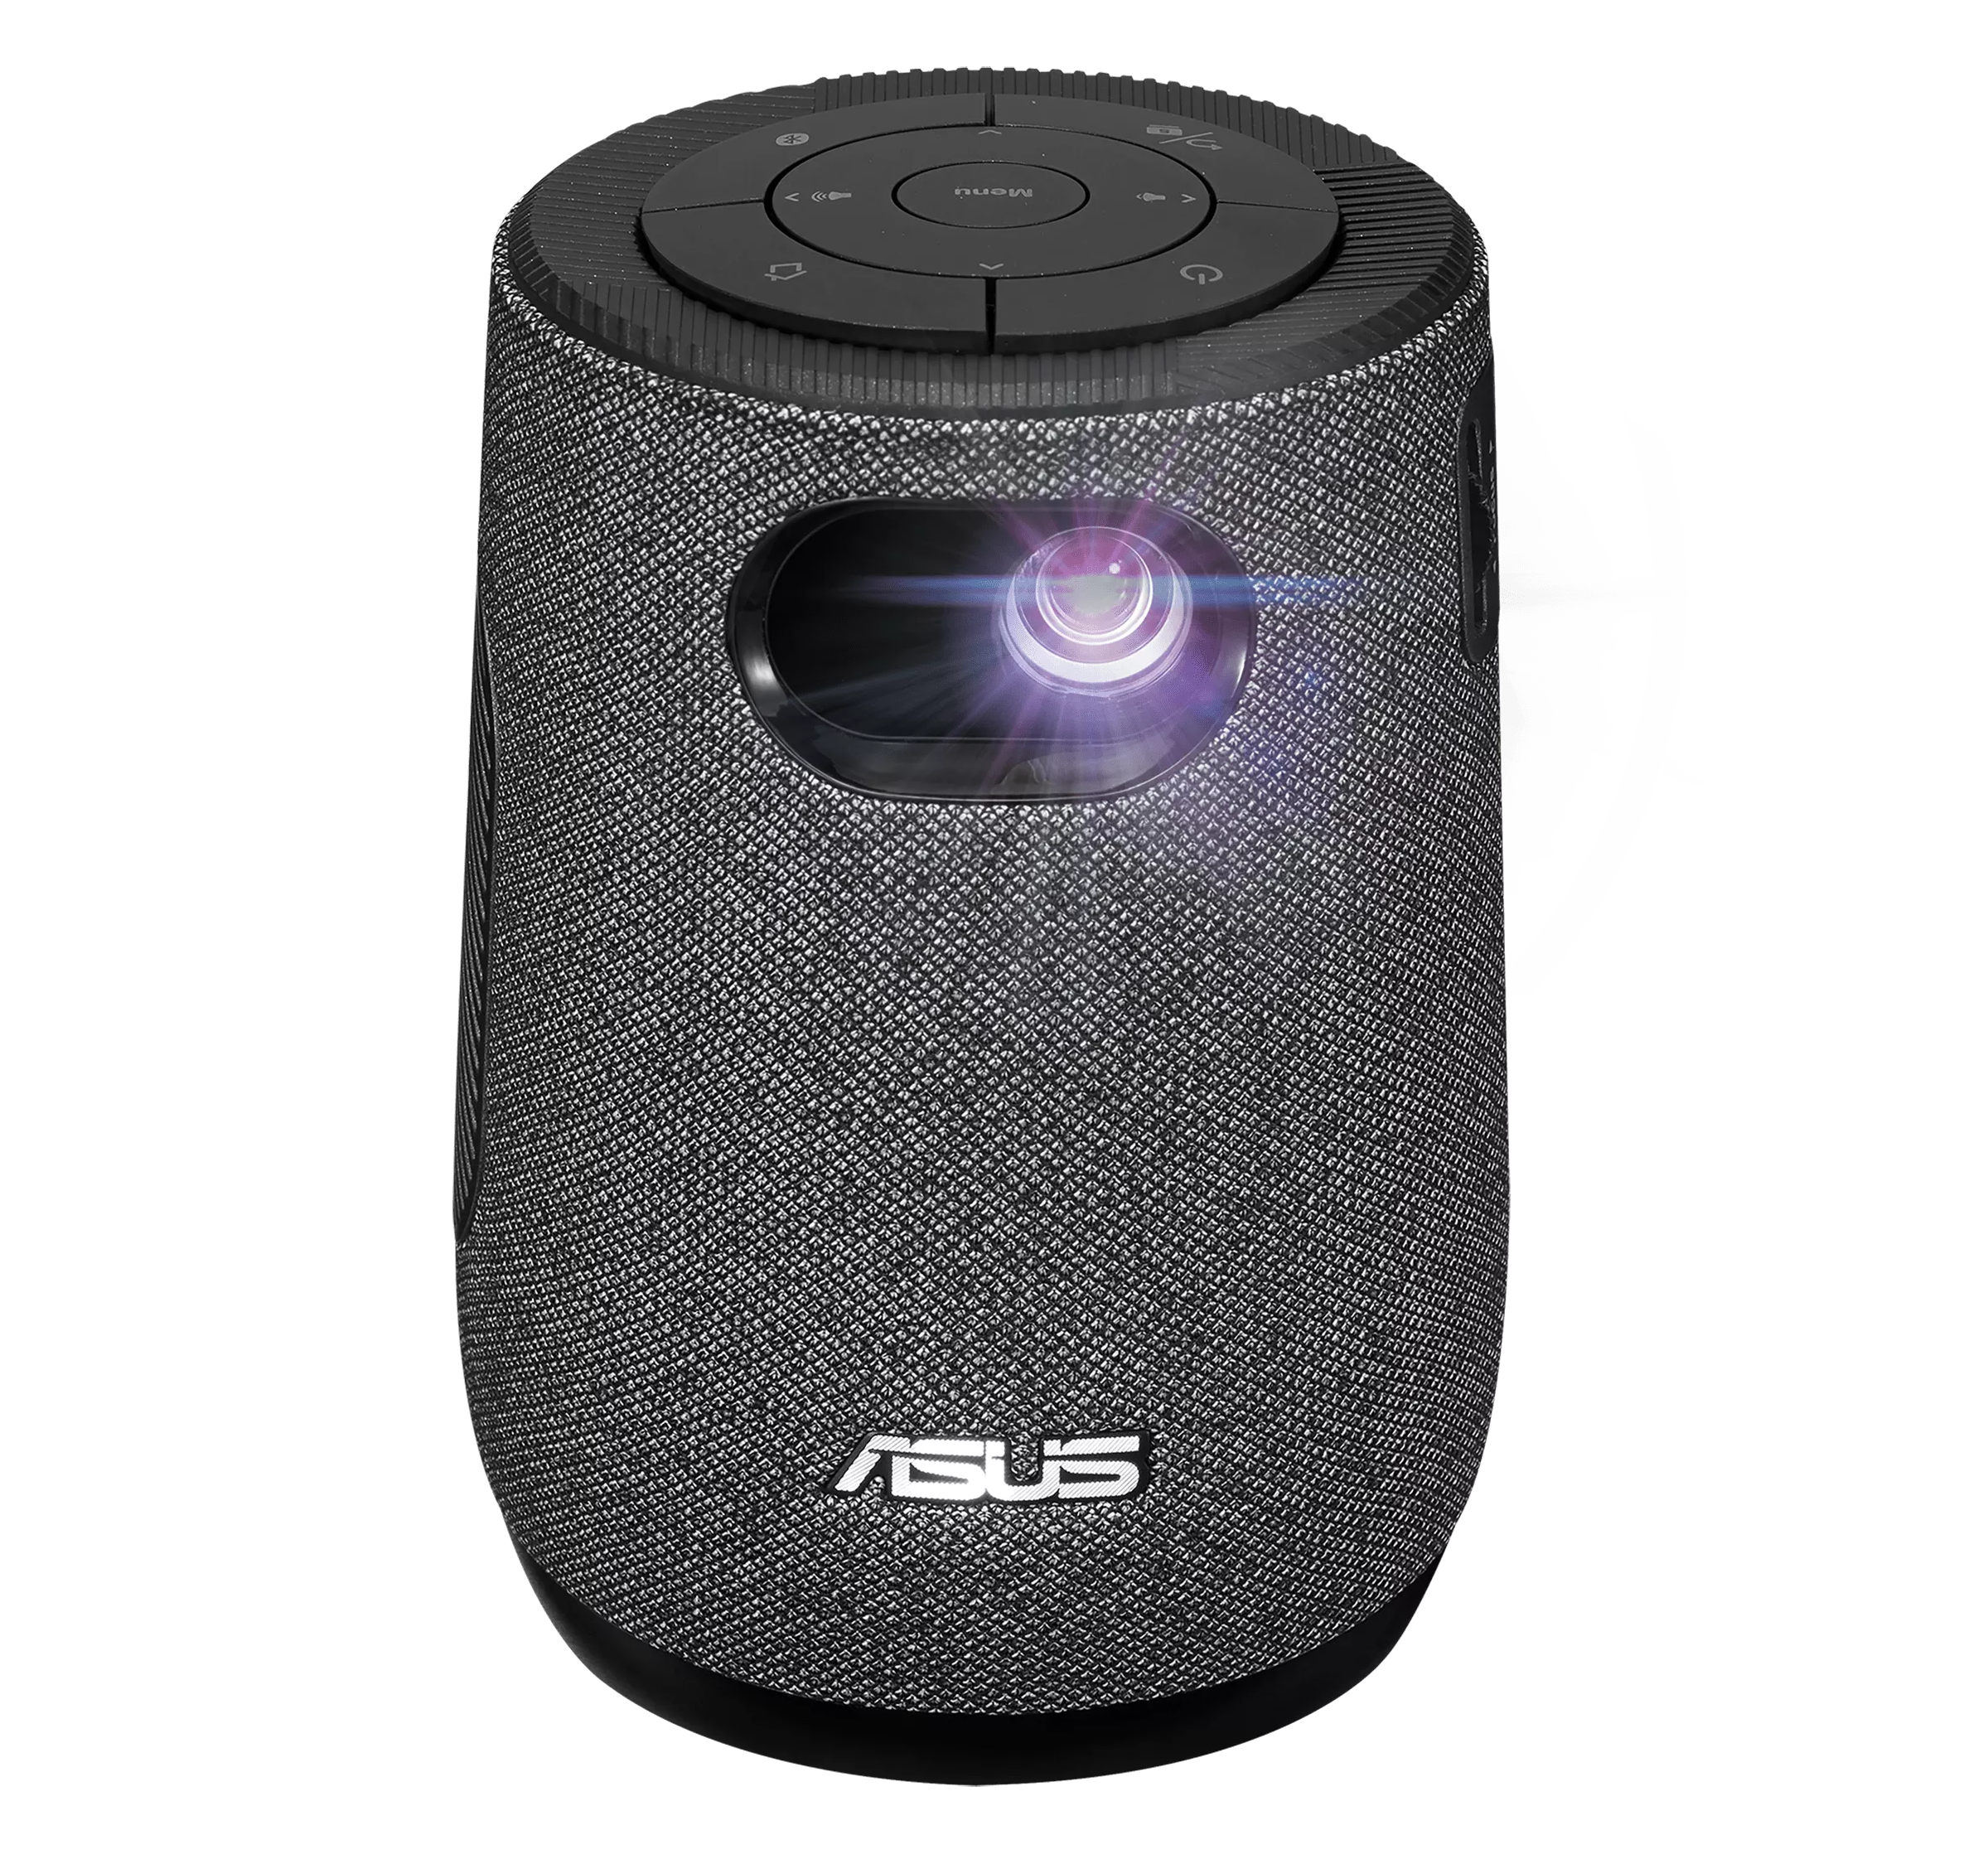 You Recently Viewed Asus L1 ZenBeam Latte Portable LED Projector  Image